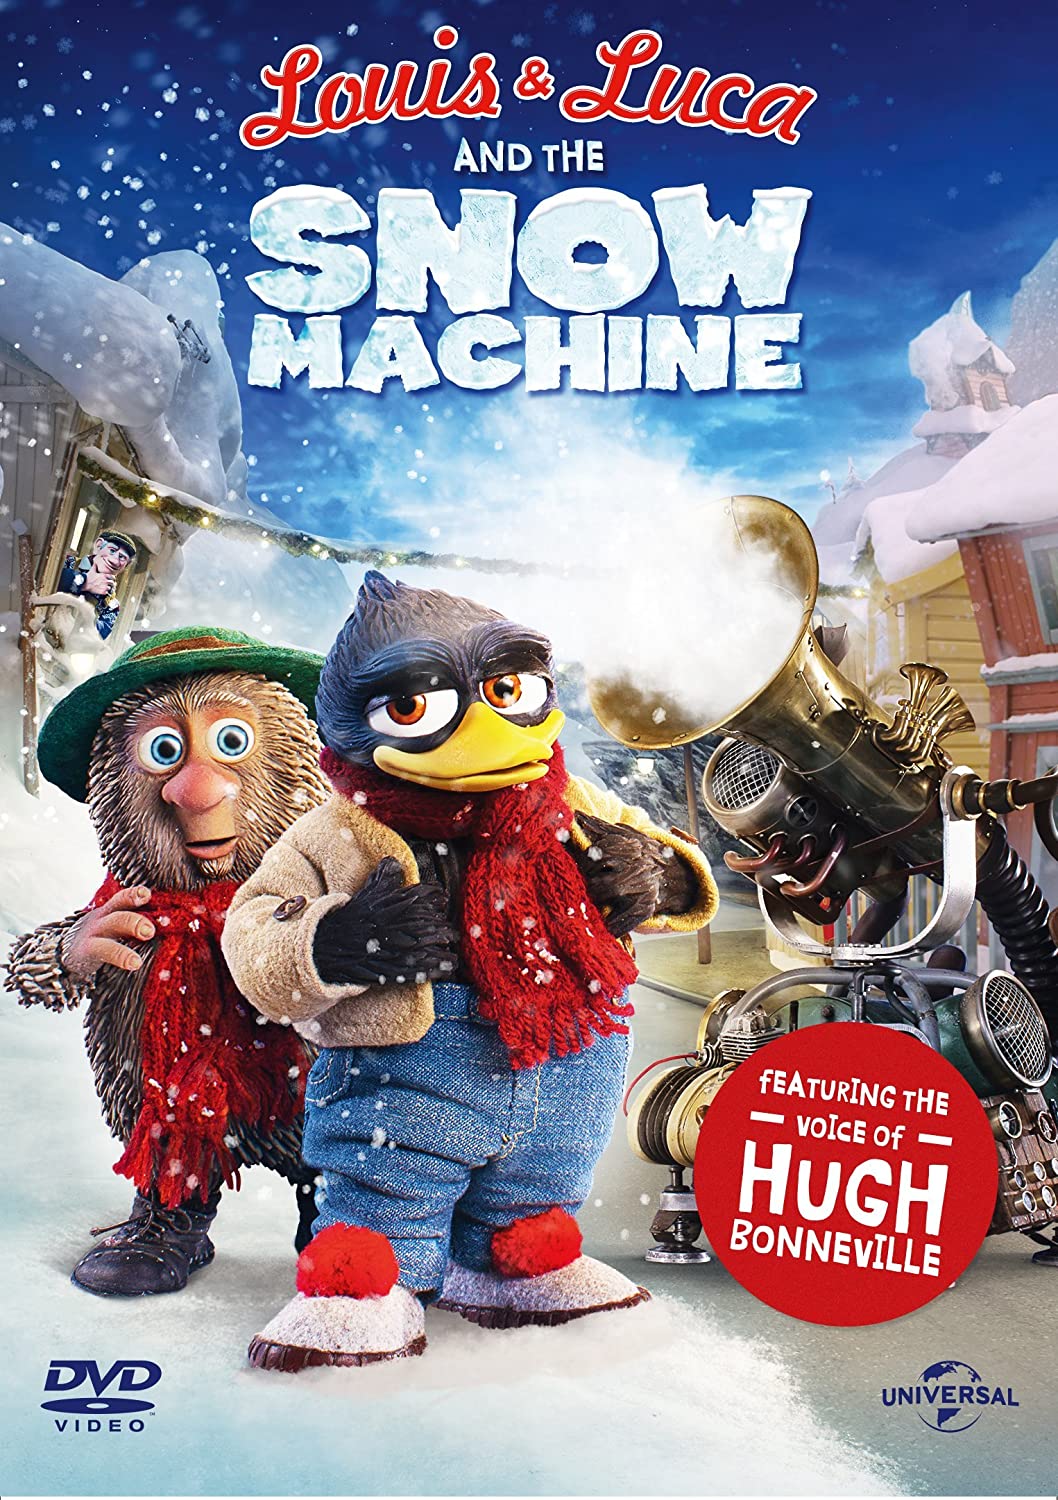 Louis And Luca And The Snow Machine (DVD)